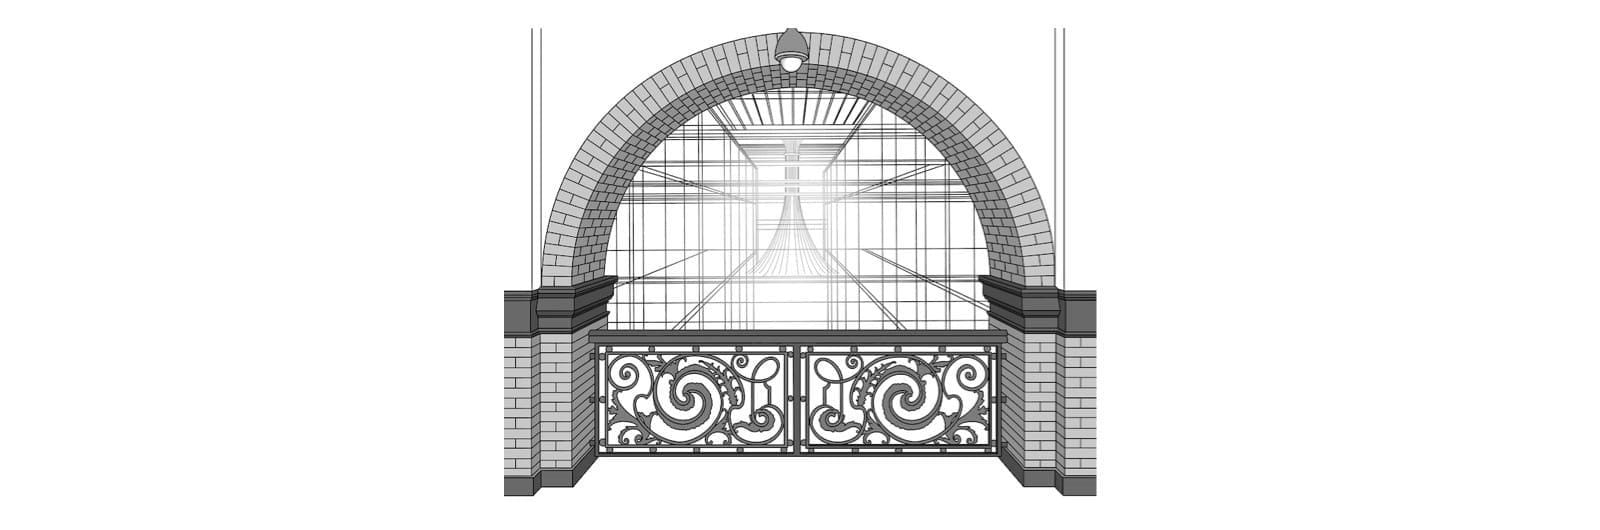 Student sketch of Main Building ceiling.